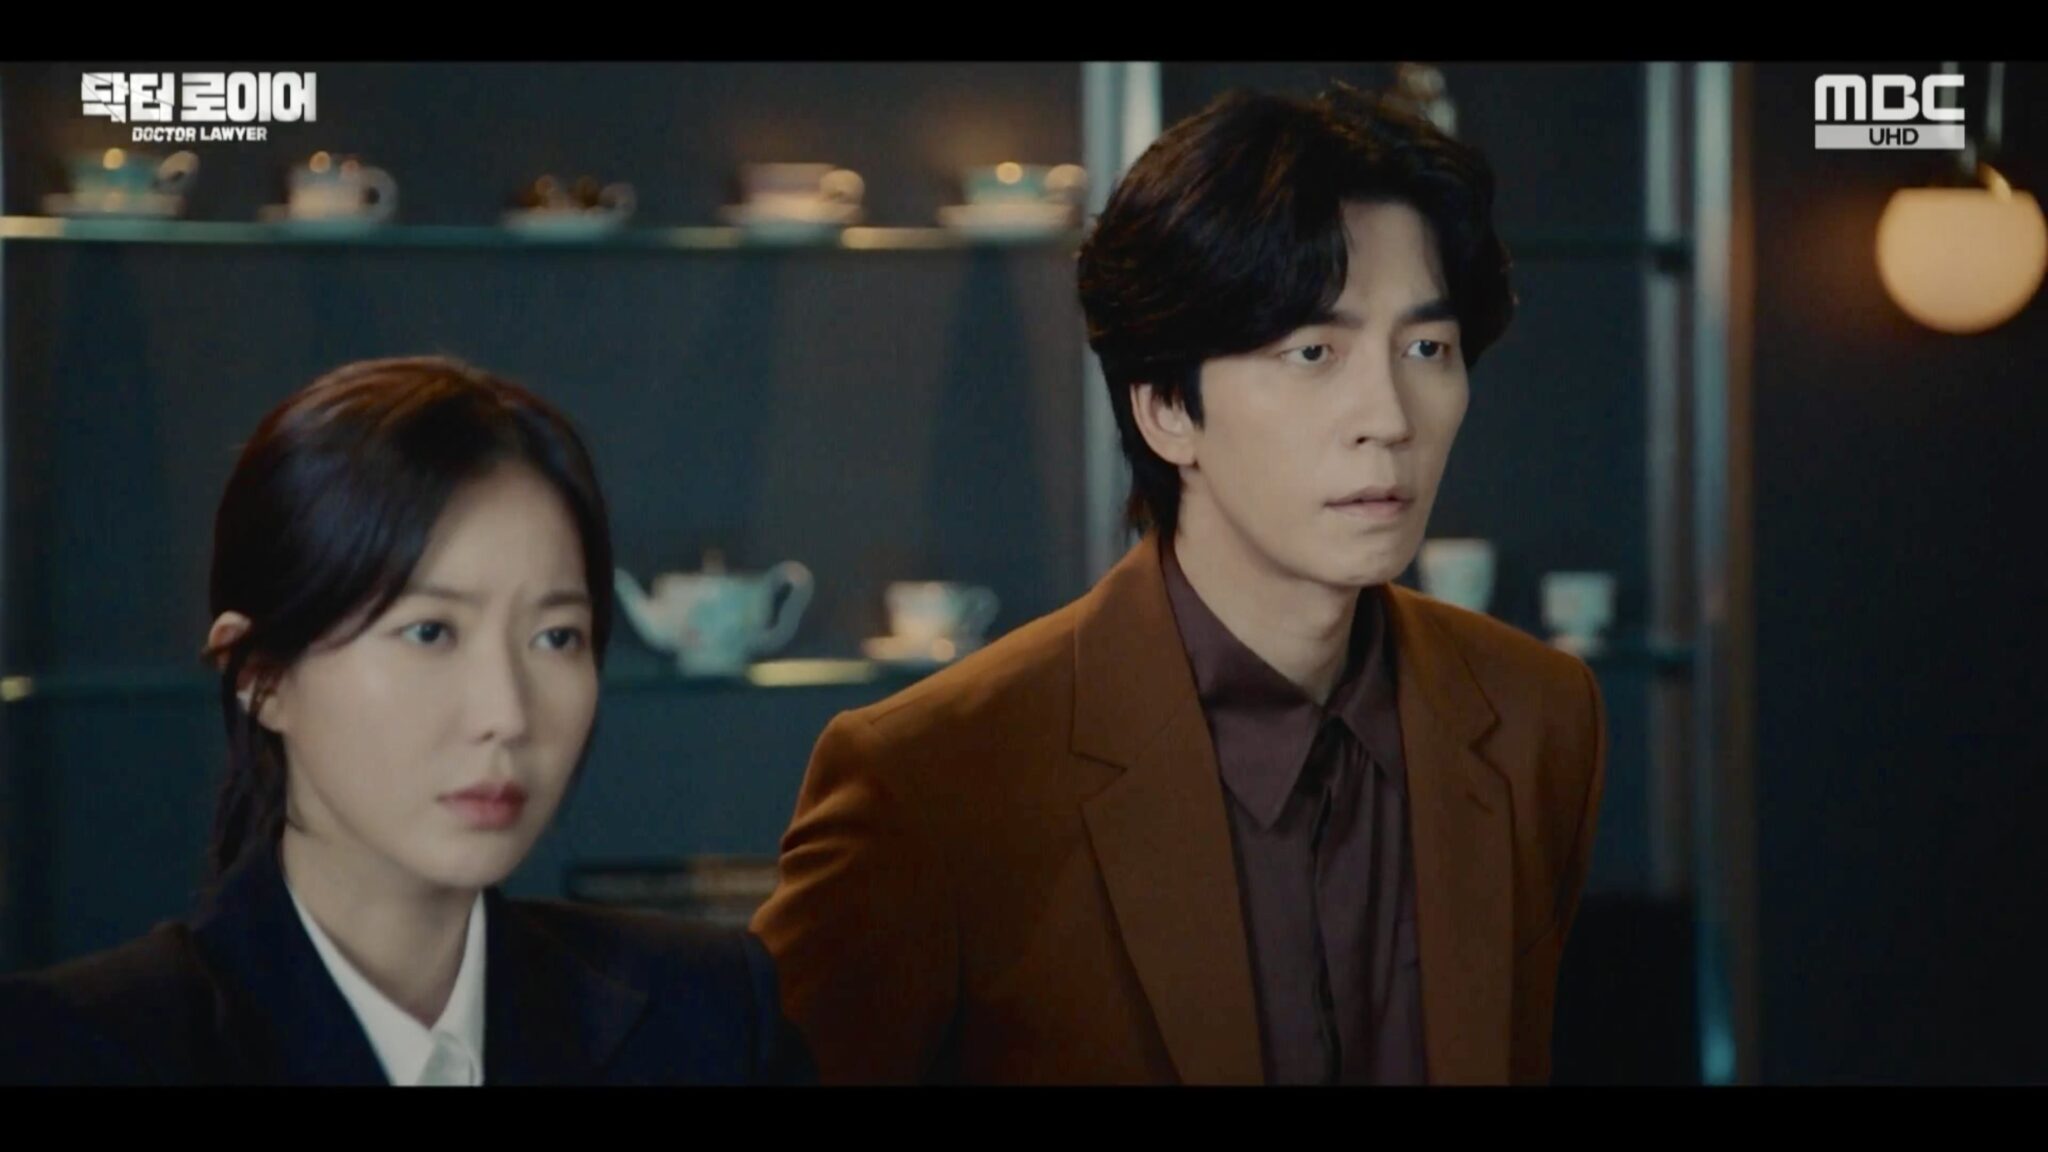 Doctor Lawyer: Episodes 11-12